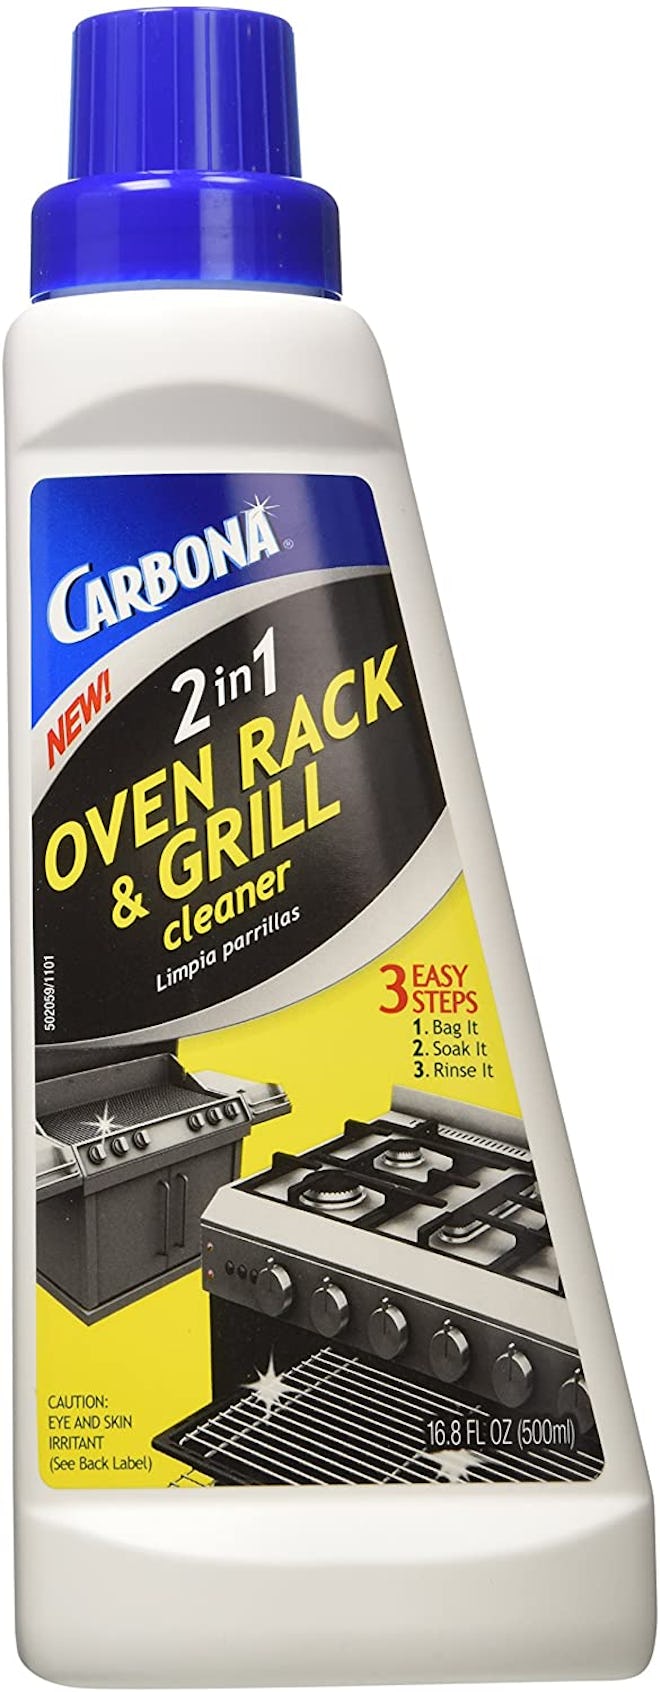 Carbona 2-In 1 Oven Rack And Barbeque Cleaner (16.9 Ounces) 